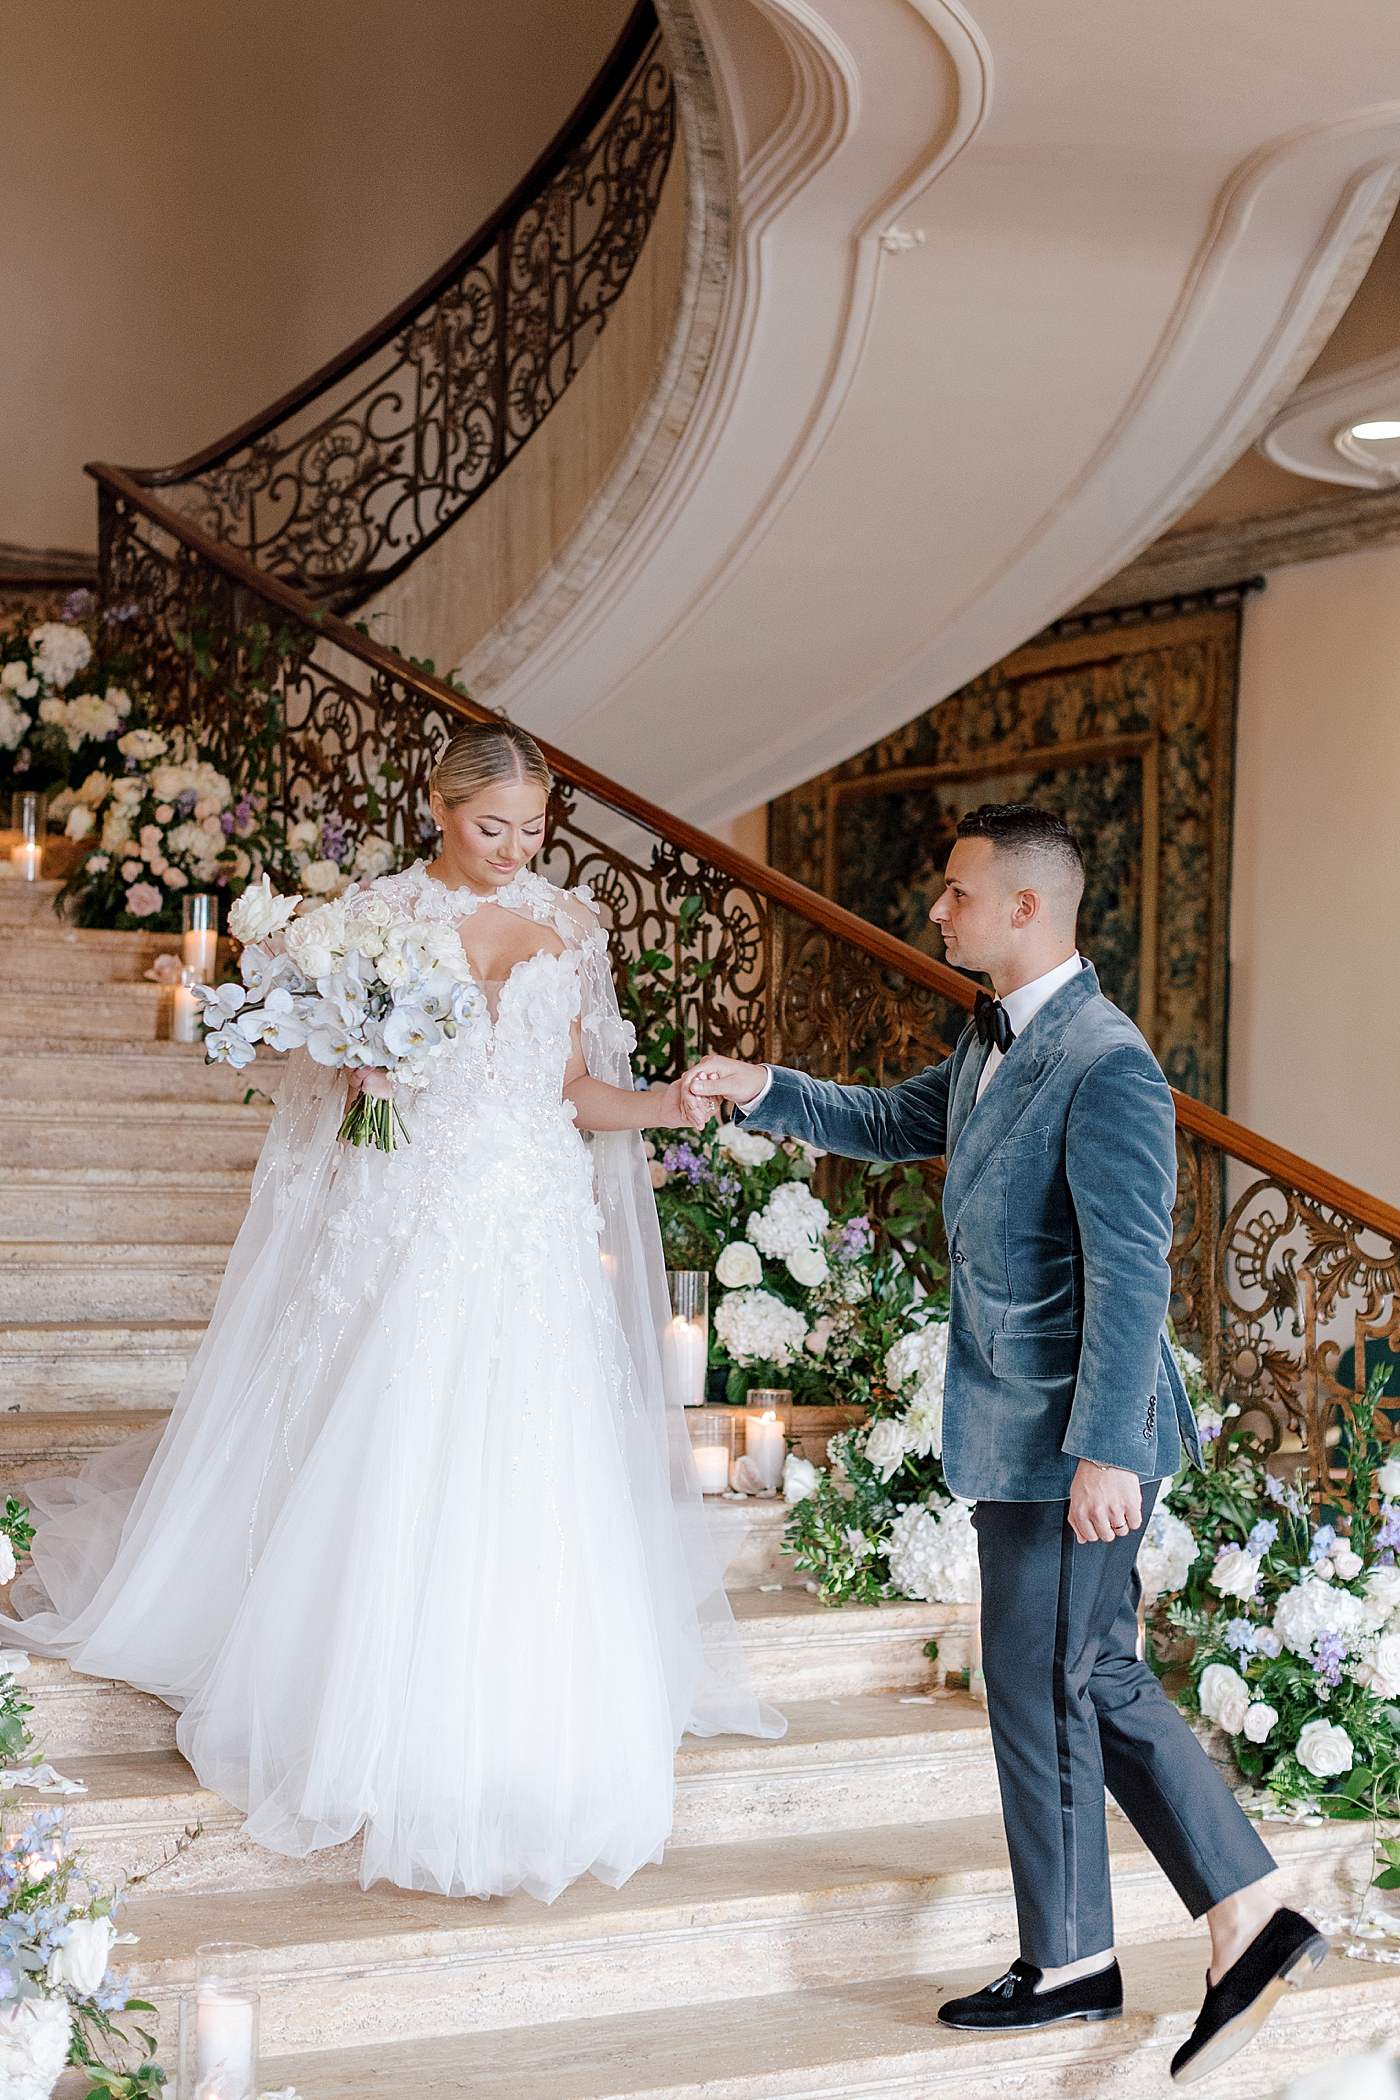 Groom helping bride down the stairs | Image by Hope Helmuth Photography